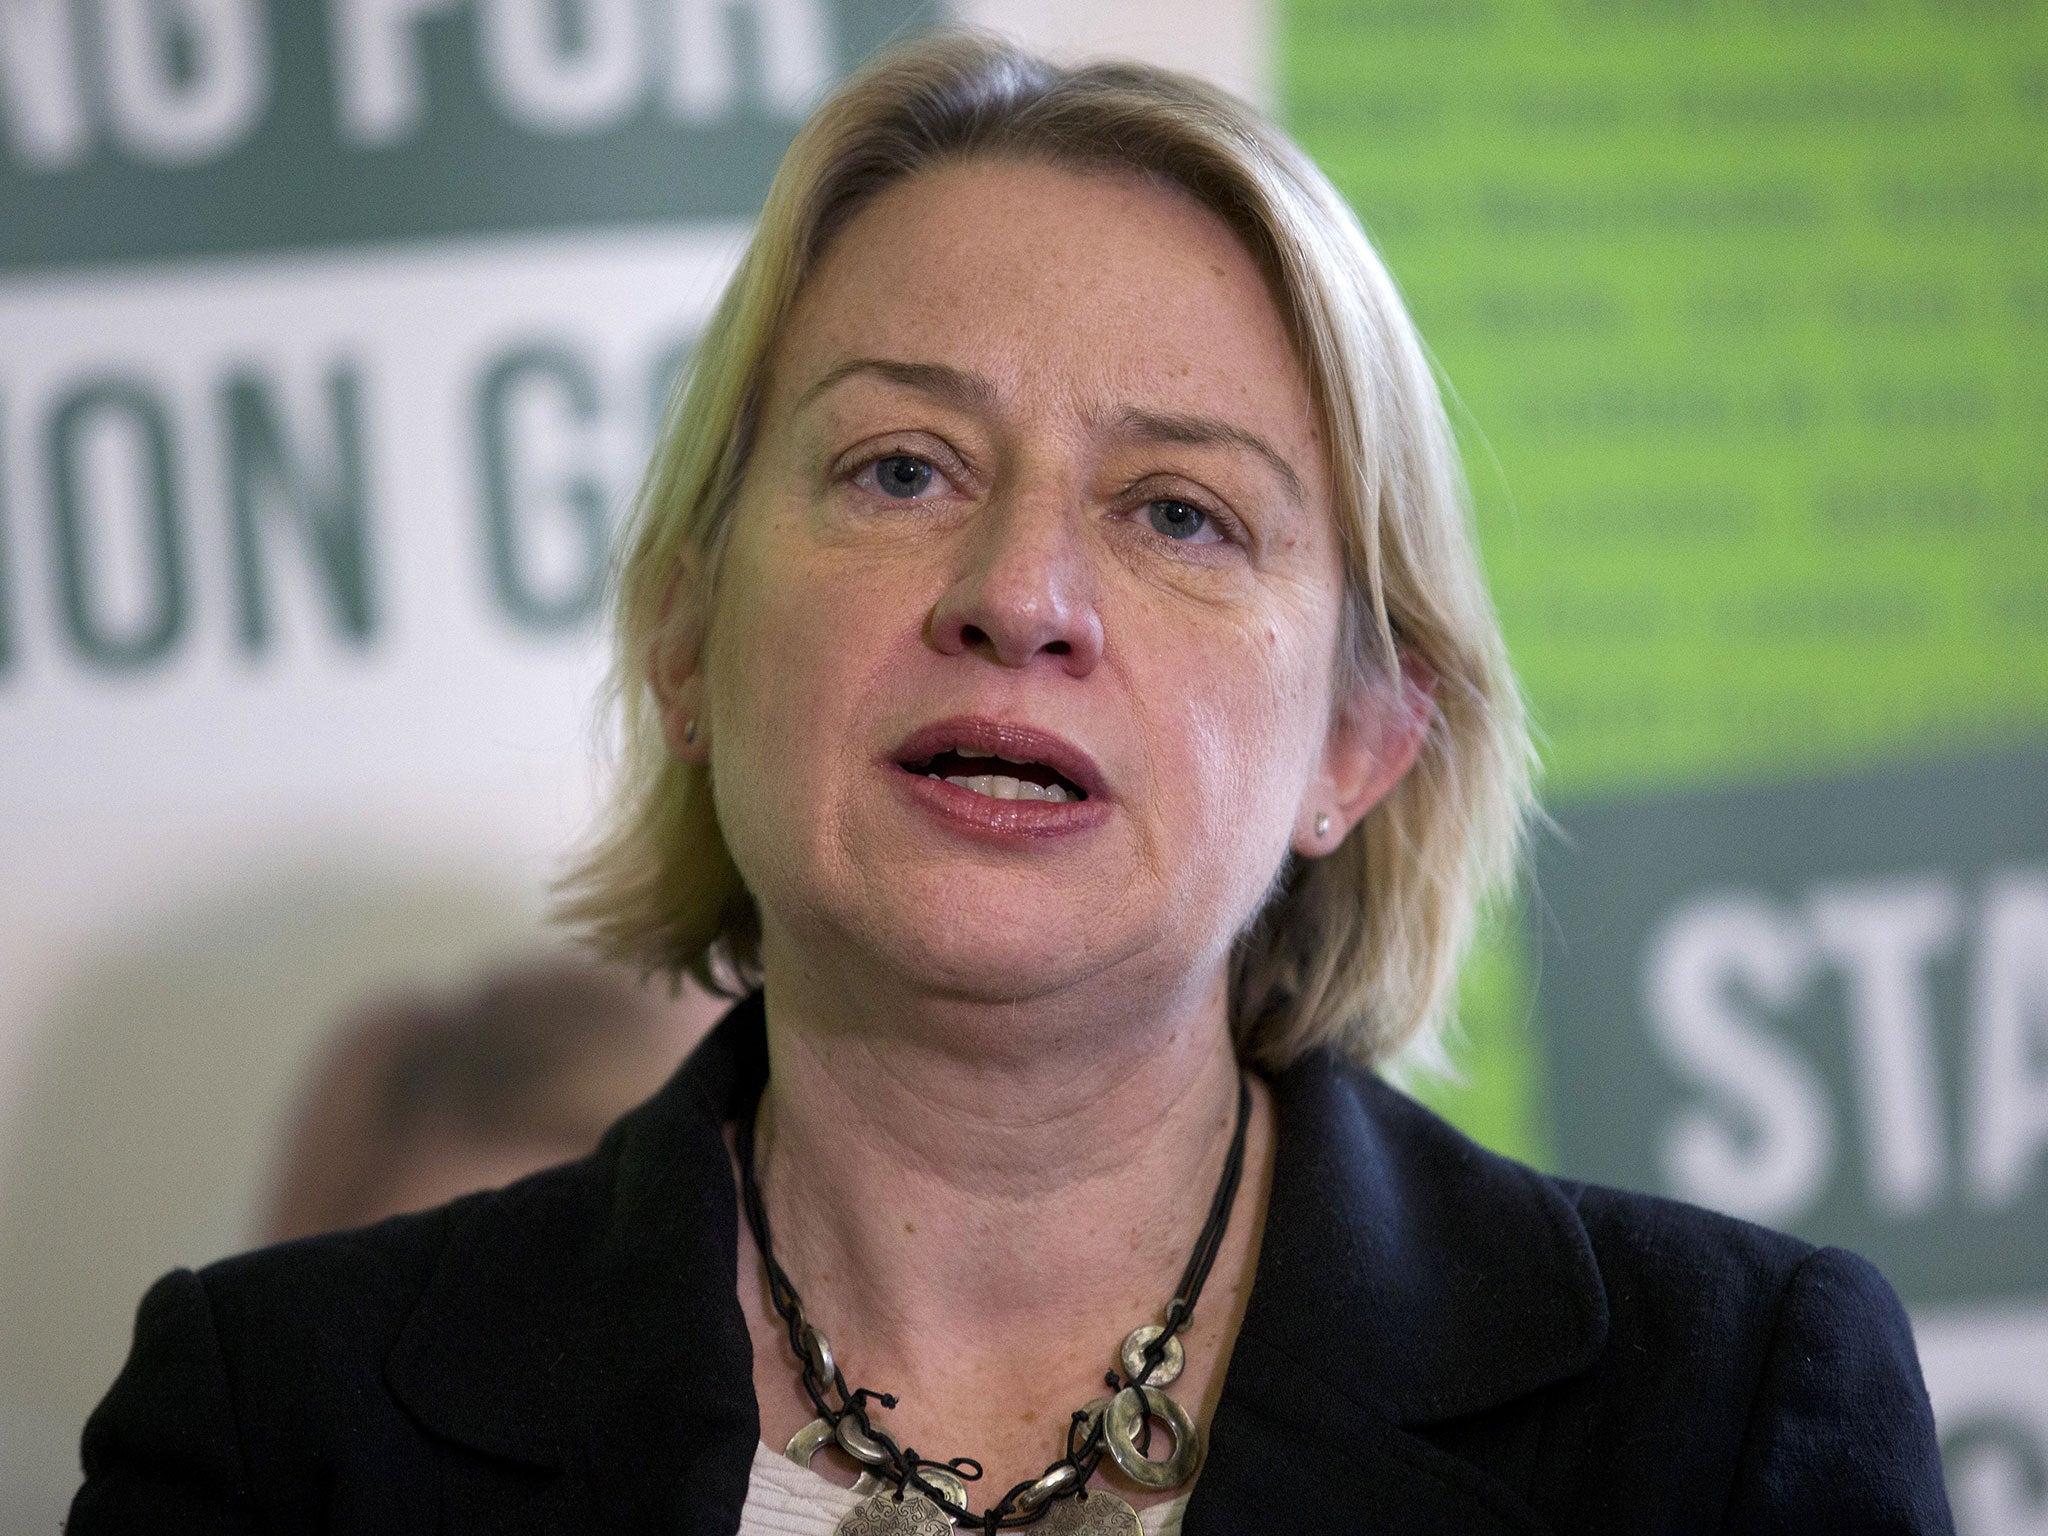 Green Party leader Natalie Bennett speaks during a press conference to launch the party's election campaign in London on February 24, 2015.